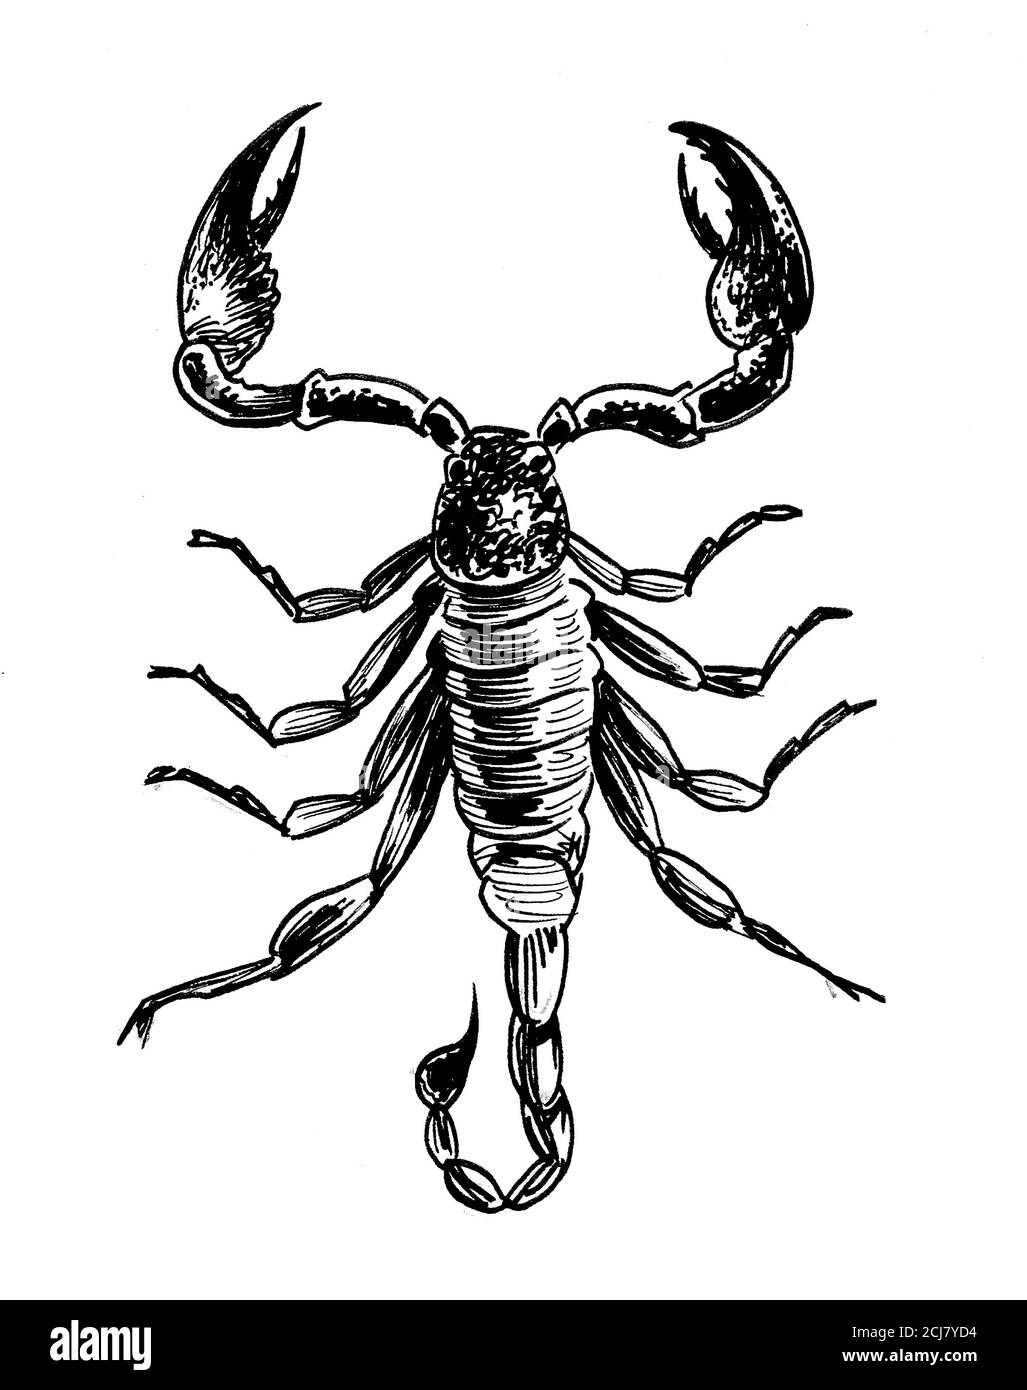 Poisonous scorpion. Ink black and white drawing Stock Photo